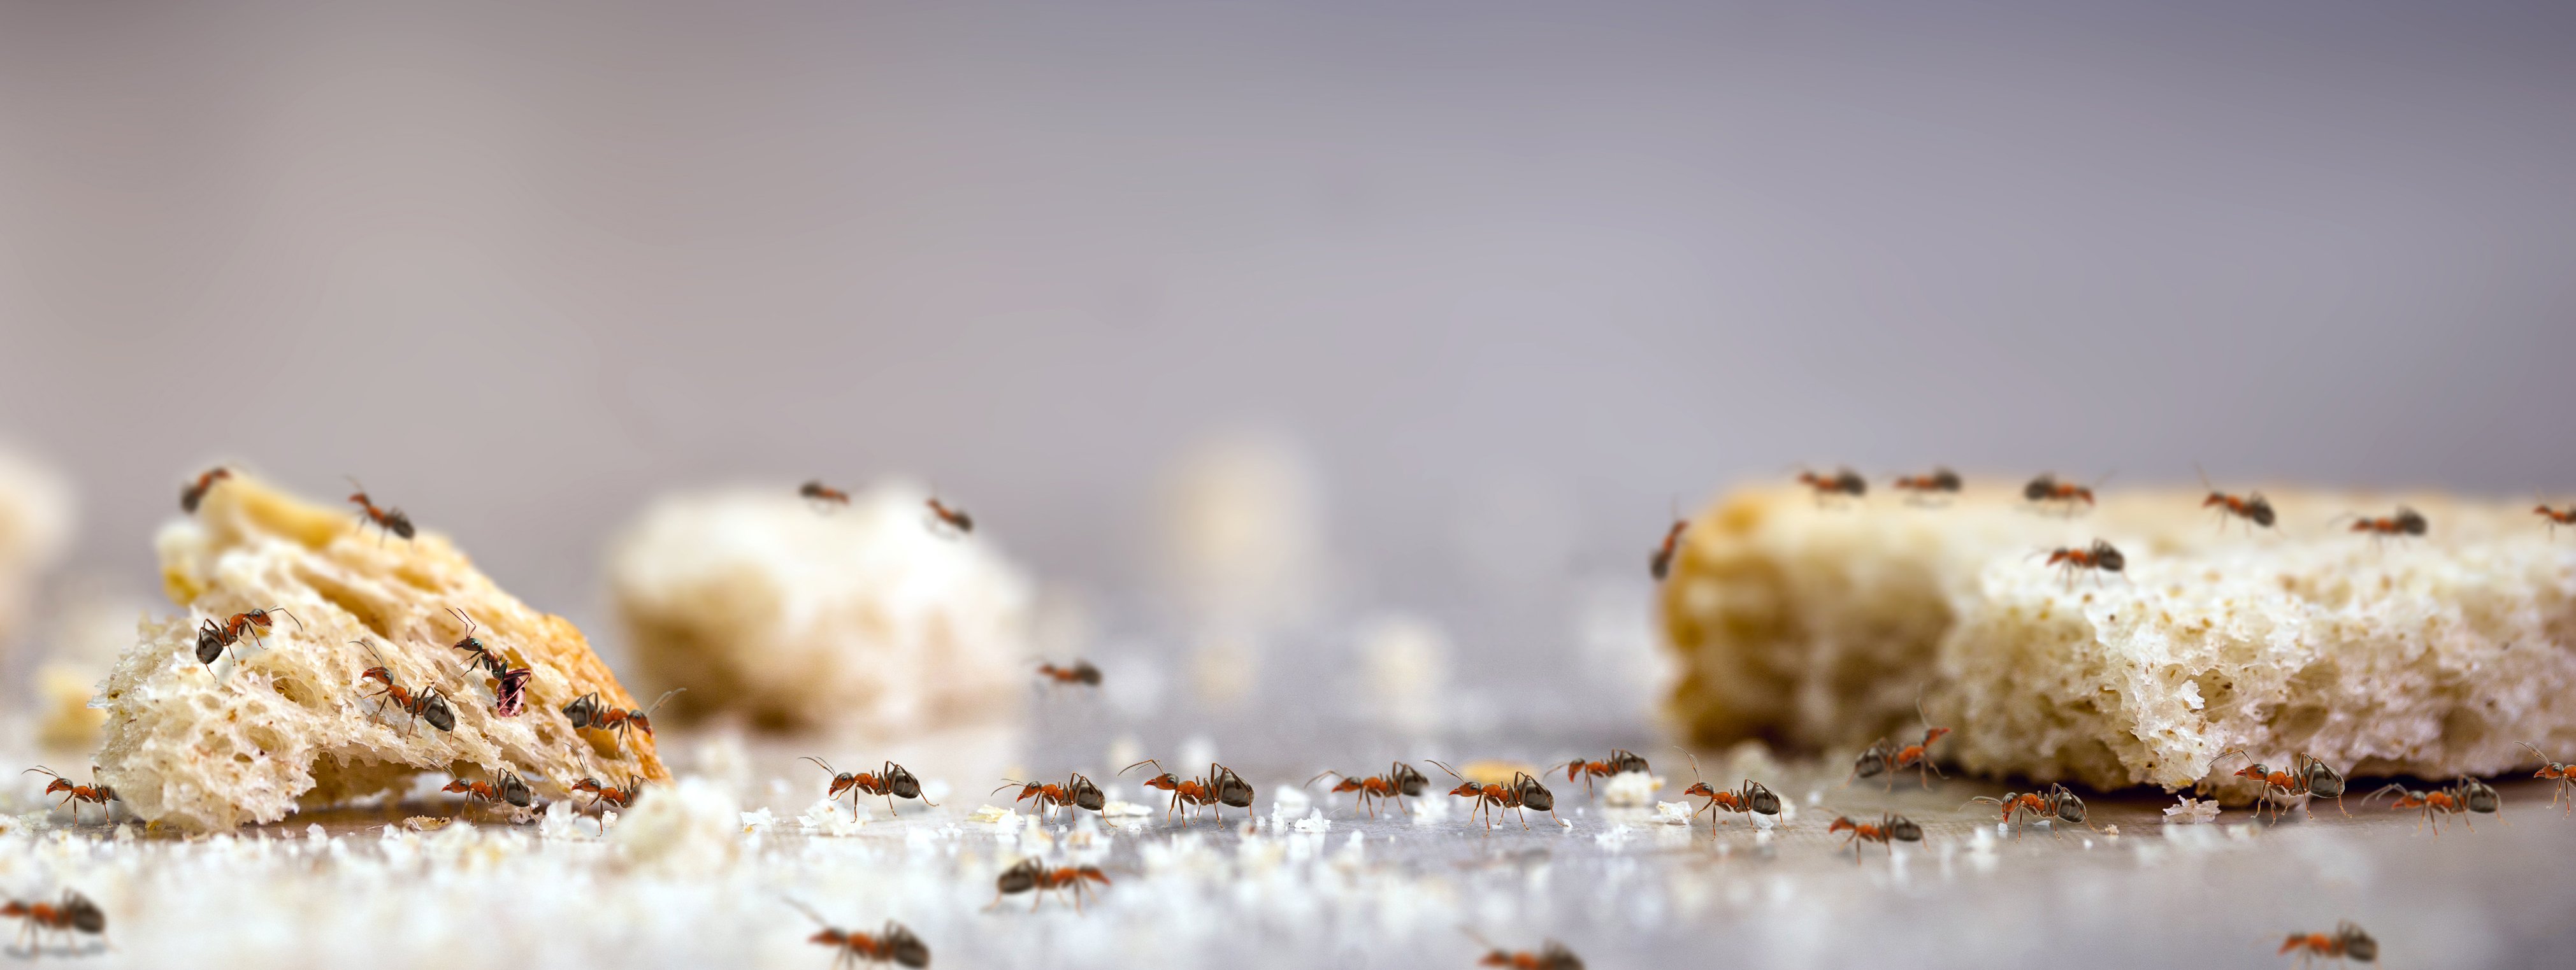 5 tips for managing a spring ant infestation at home